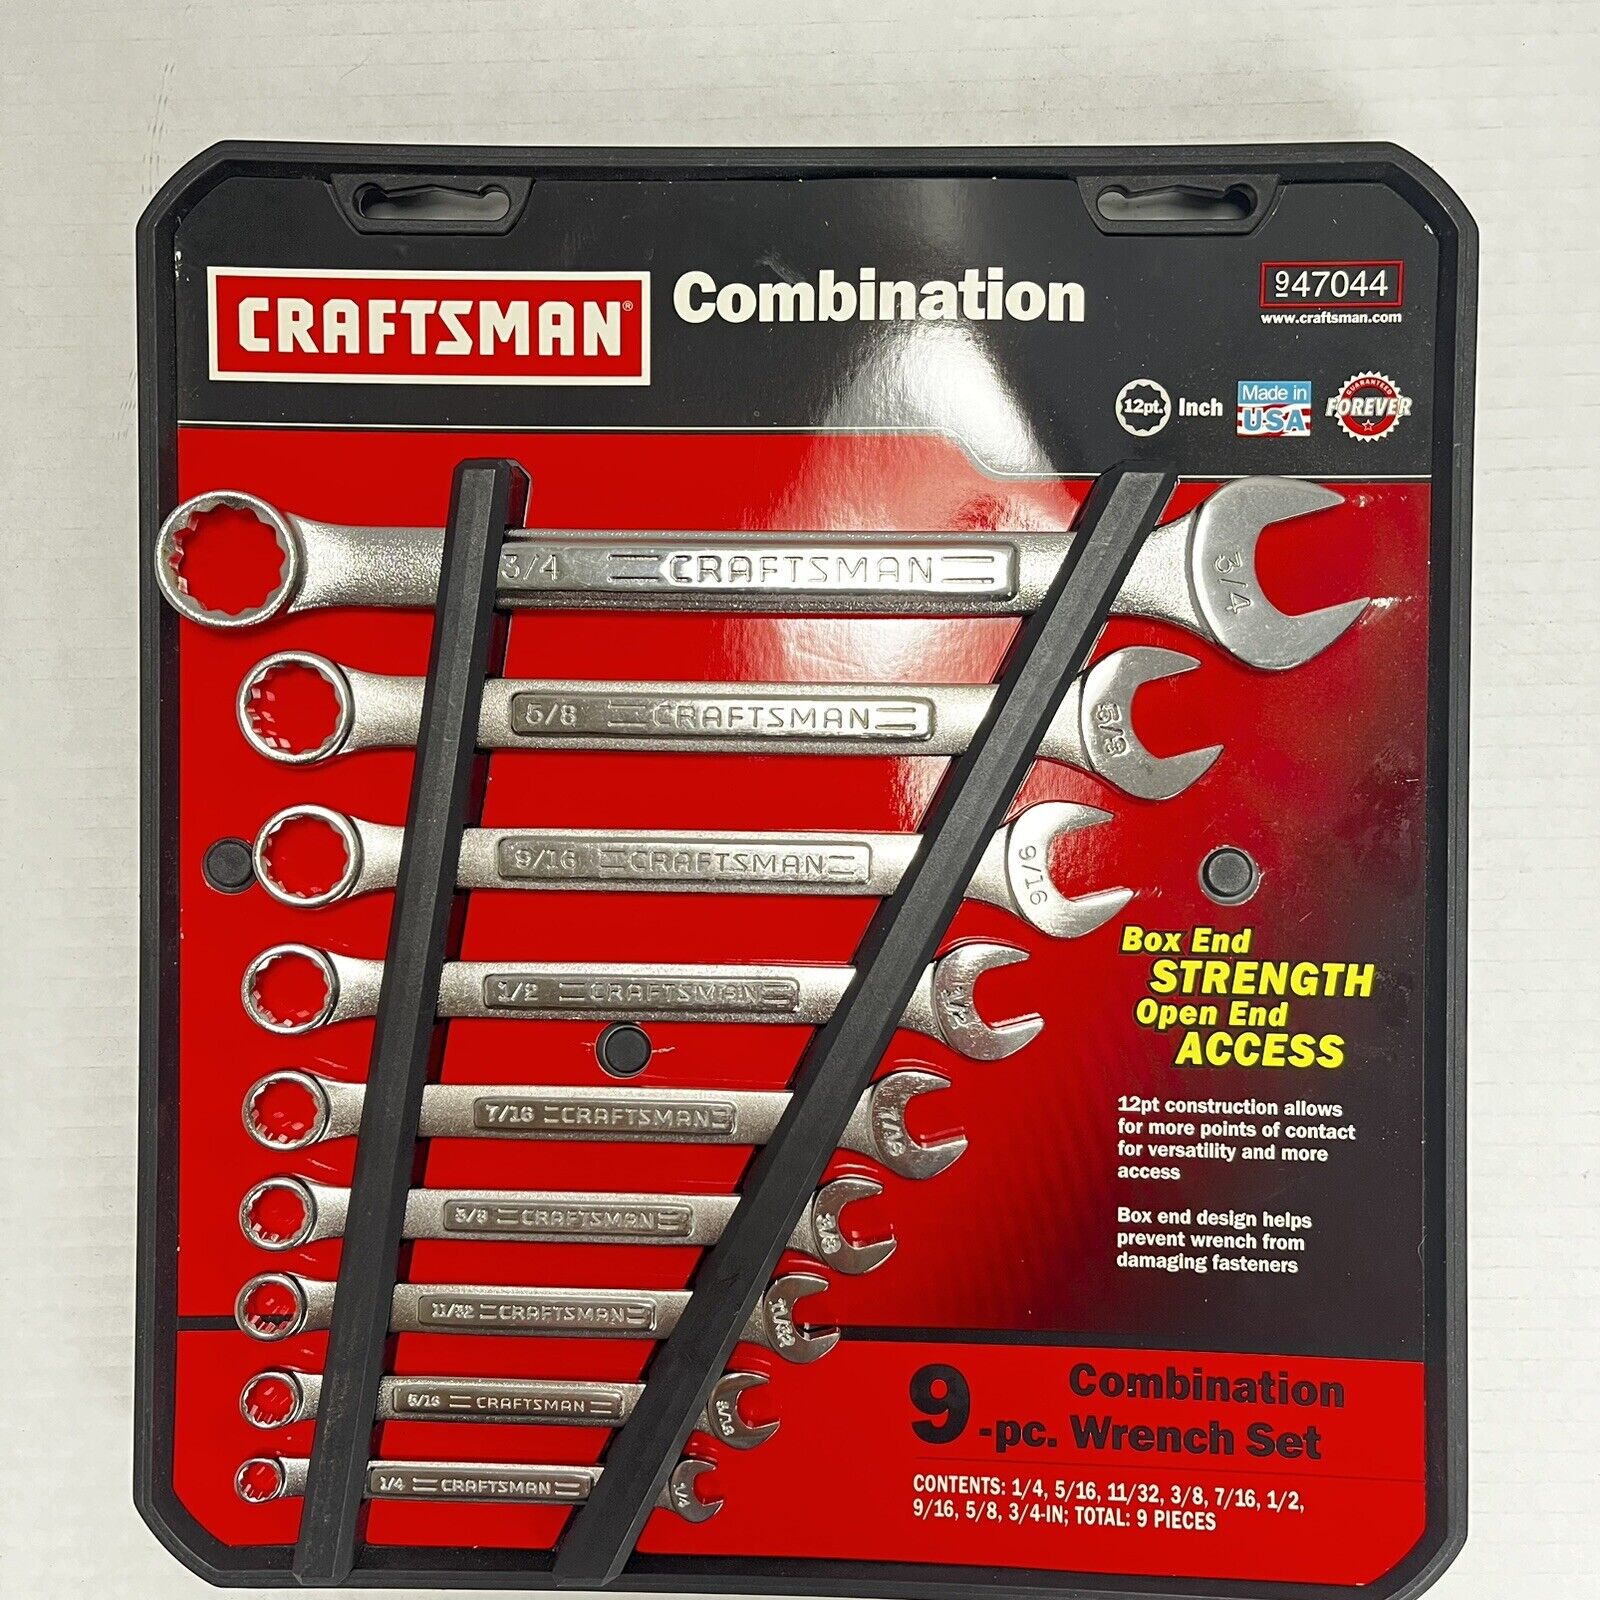 Craftsman USA 9 Pc. Set Of 12 Point Combination Wrench Set 947044 NOS Vintage